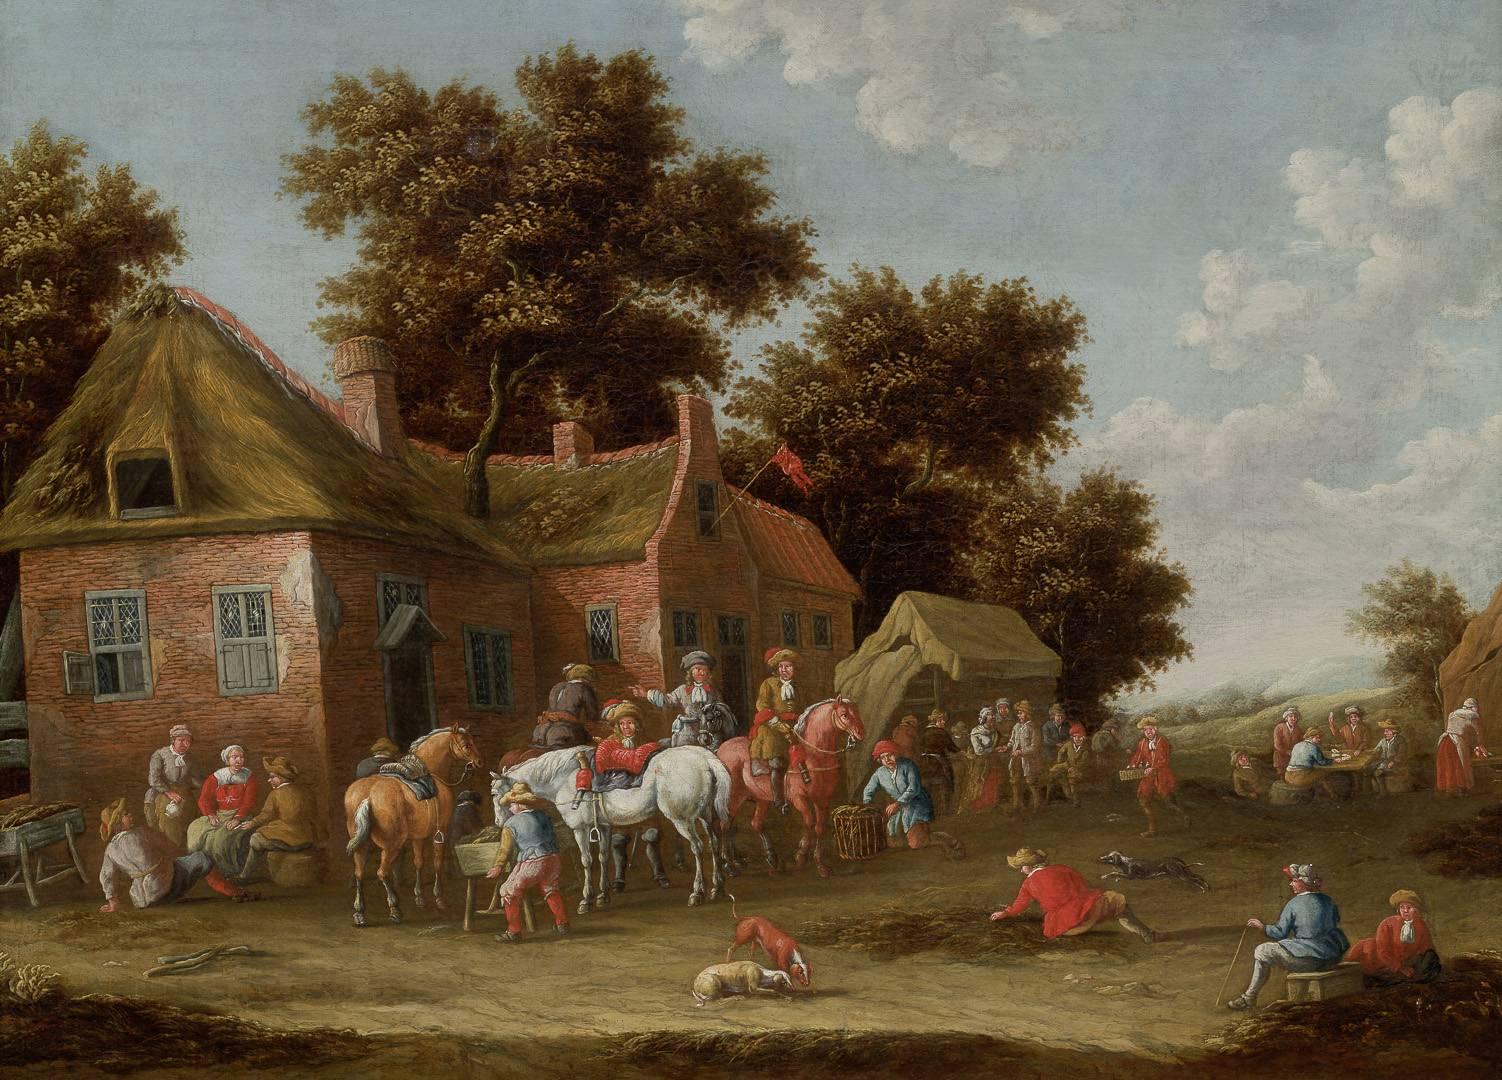 Barend Gael Landscape Painting - Staging area at a public house